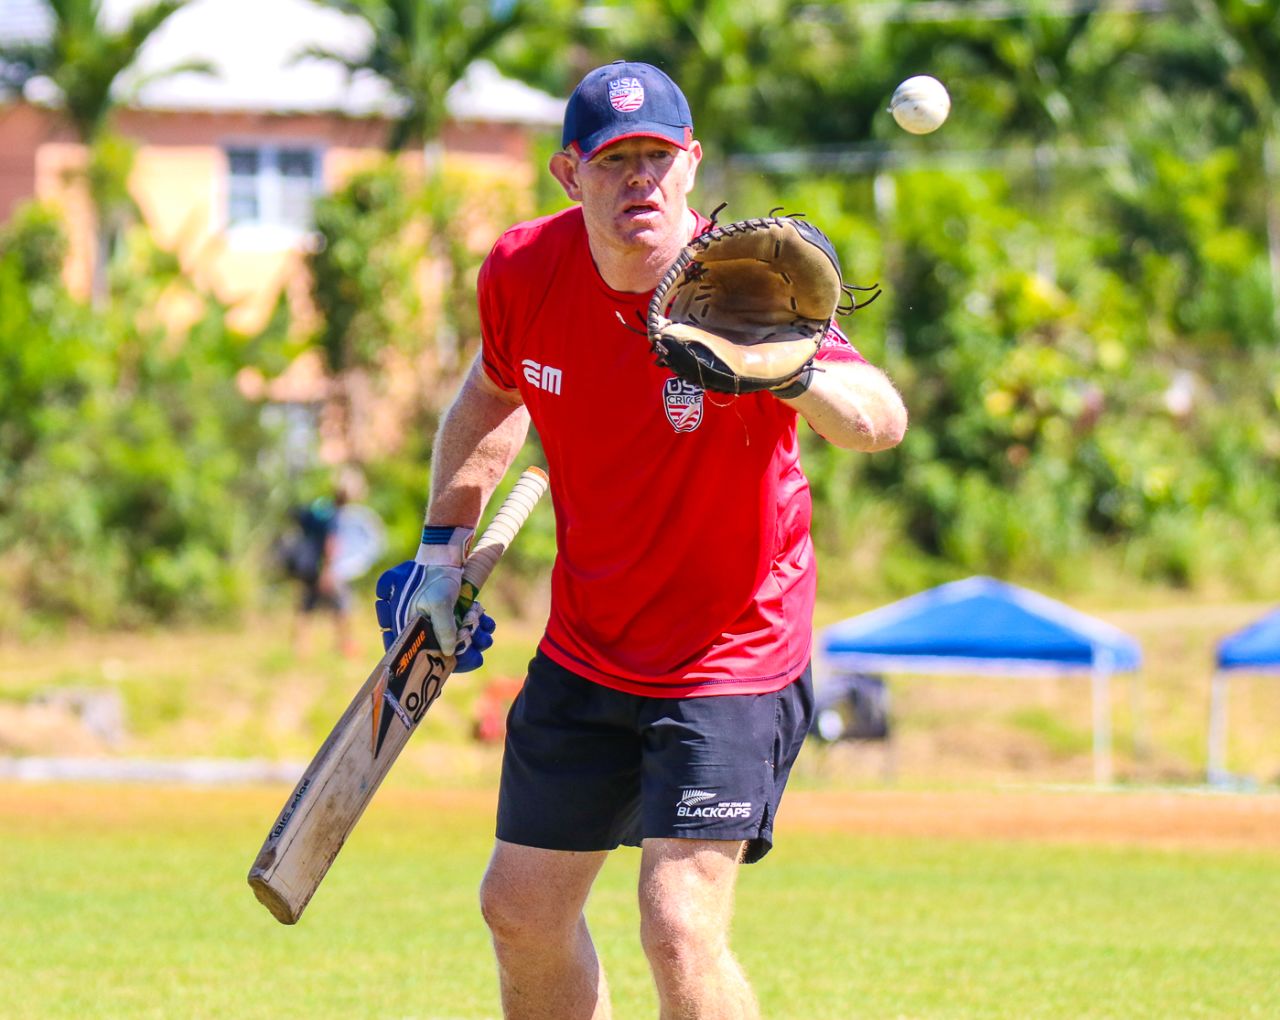 Coach James Pamment goes through a fielding drill during pre-game warm-ups, Cayman Islands v USA, ICC Americas Regional Final - T20 World Cup Qualifier, Sandys Parish, August 24, 2019